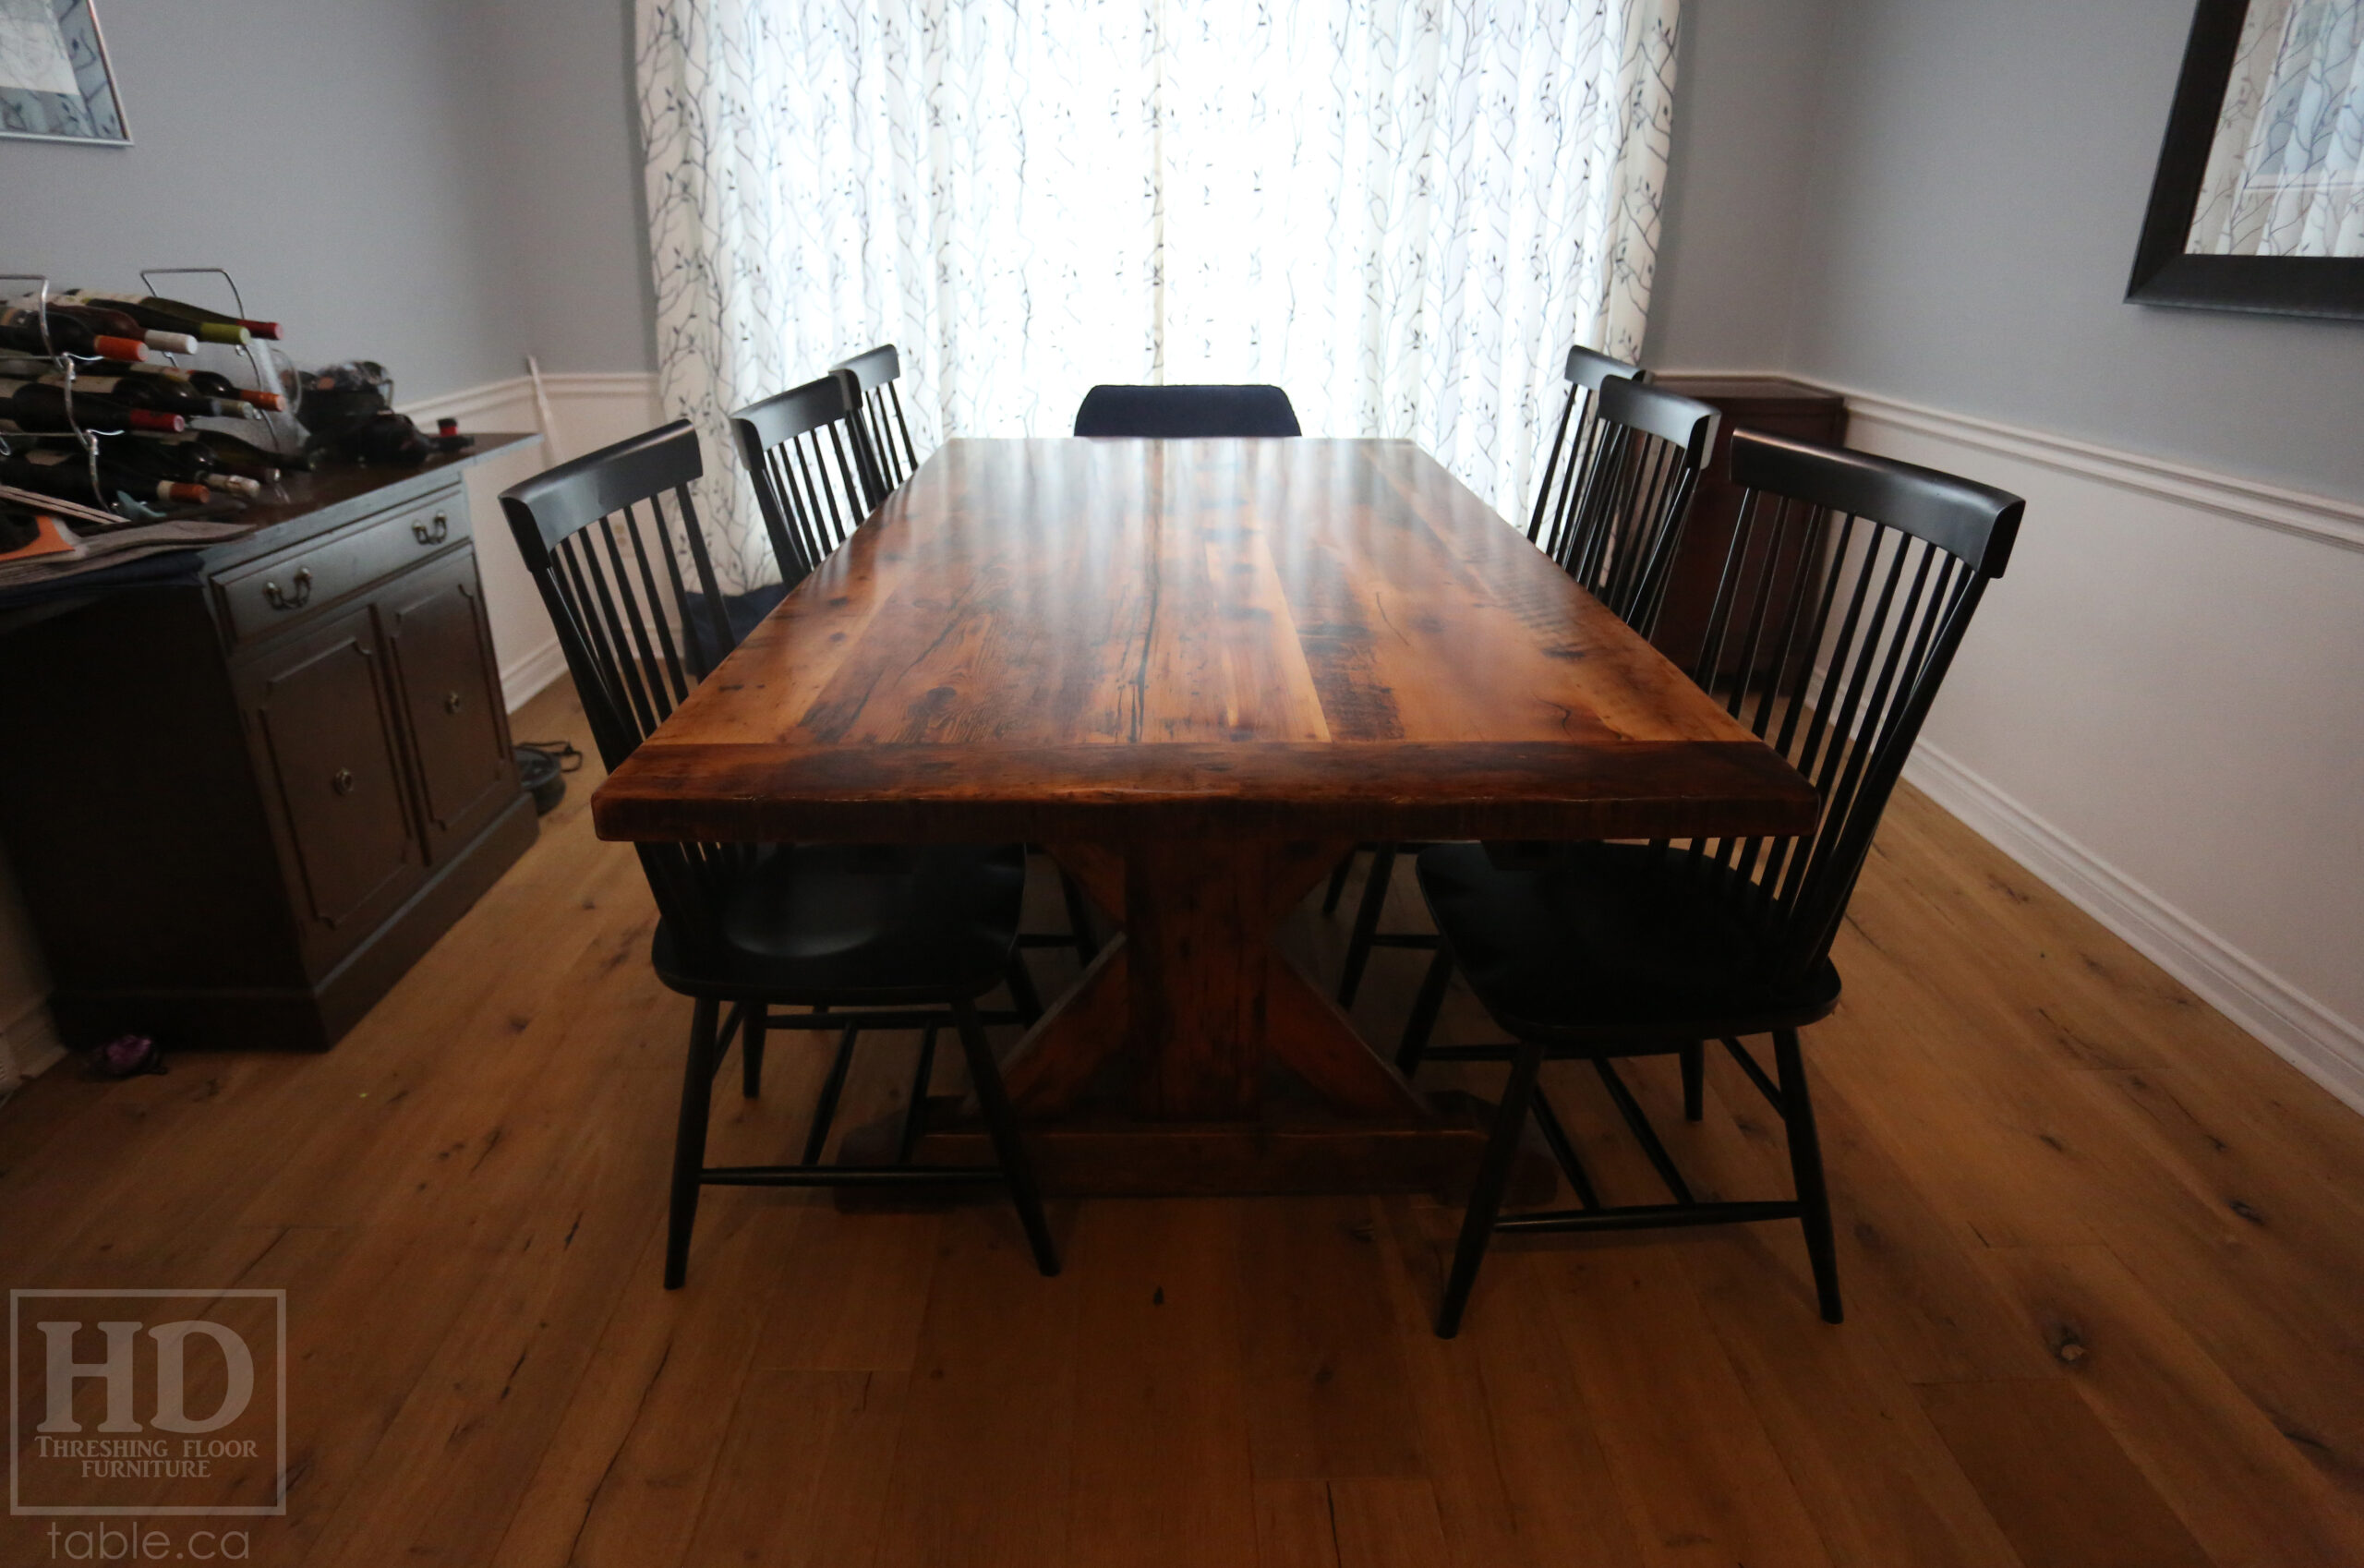 7' Ontario Barnwood Boardroom Table we made for a St. Catherines, Ontario Home â€“ Sawbuck Base - Old Growth Hemlock Threshing Floor Construction - Original Distressing & Edges Maintained - Premium epoxy + satin polyurethane finish â€“ Two 18â€ Leaf Extensions [making total length 10â€™ when extended] â€“ 6 Wormy Maple Shaker Chairs / Painted Solid Black / Satin polyurethane clearcoat finish - www.table.ca